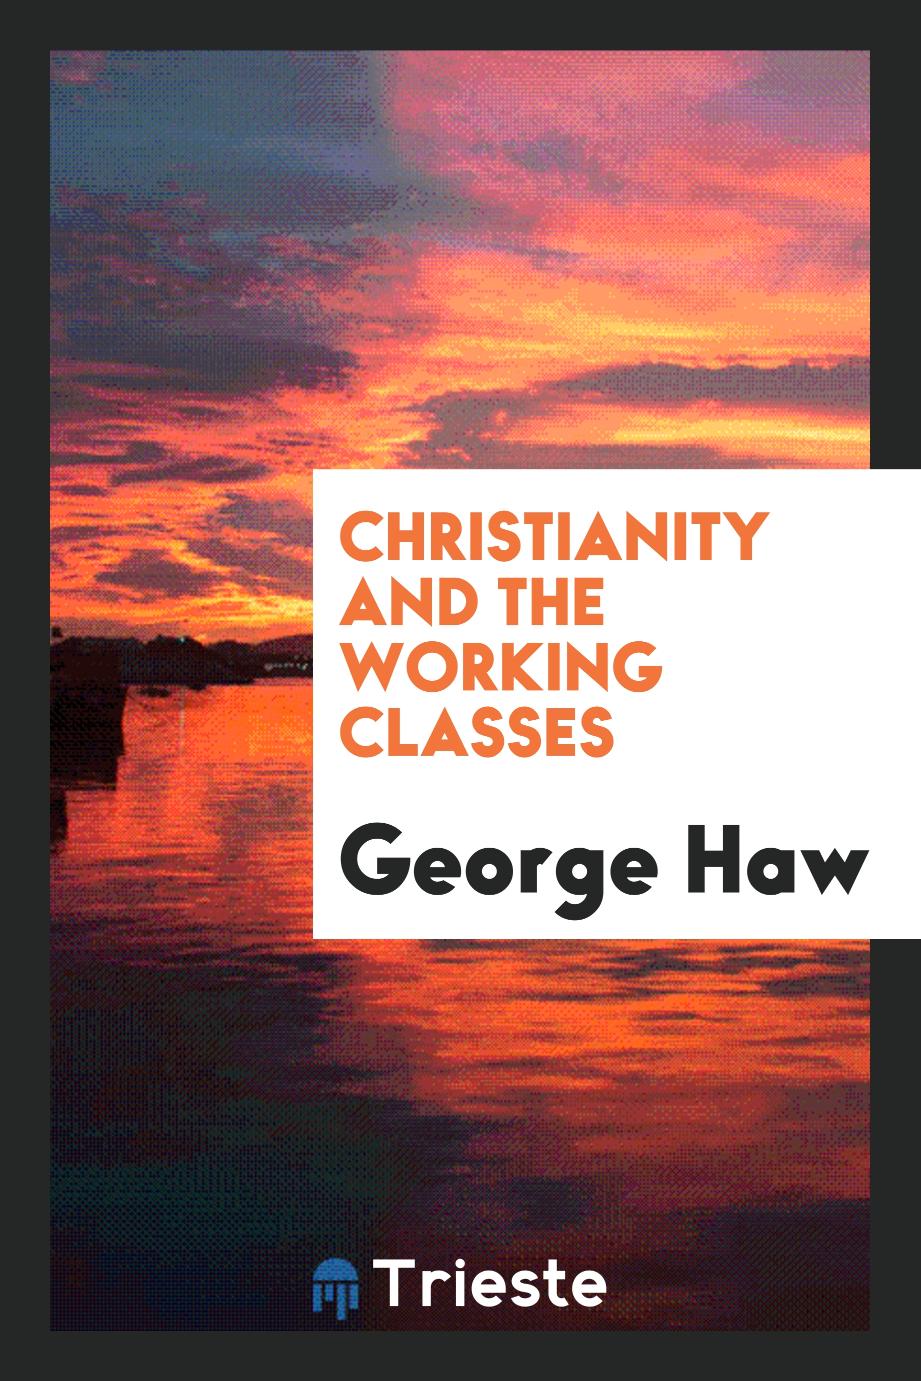 Christianity and the working classes